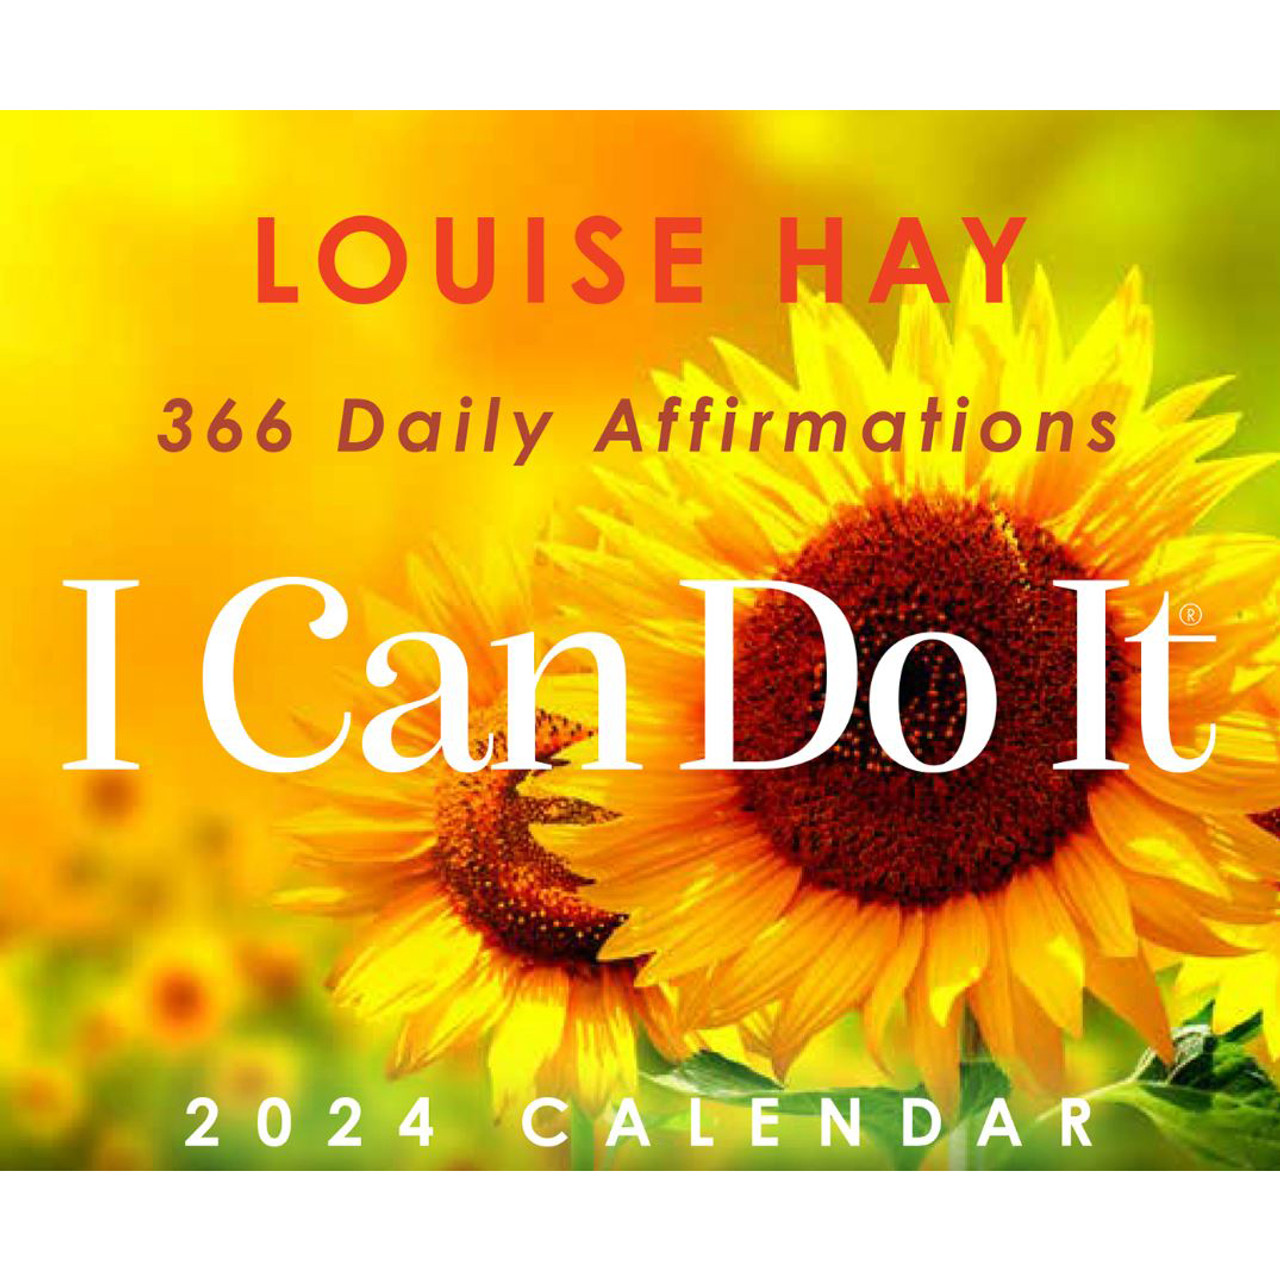 I Can Do It 2021 Calendar: 365 DAILY AFFIRMATIONS